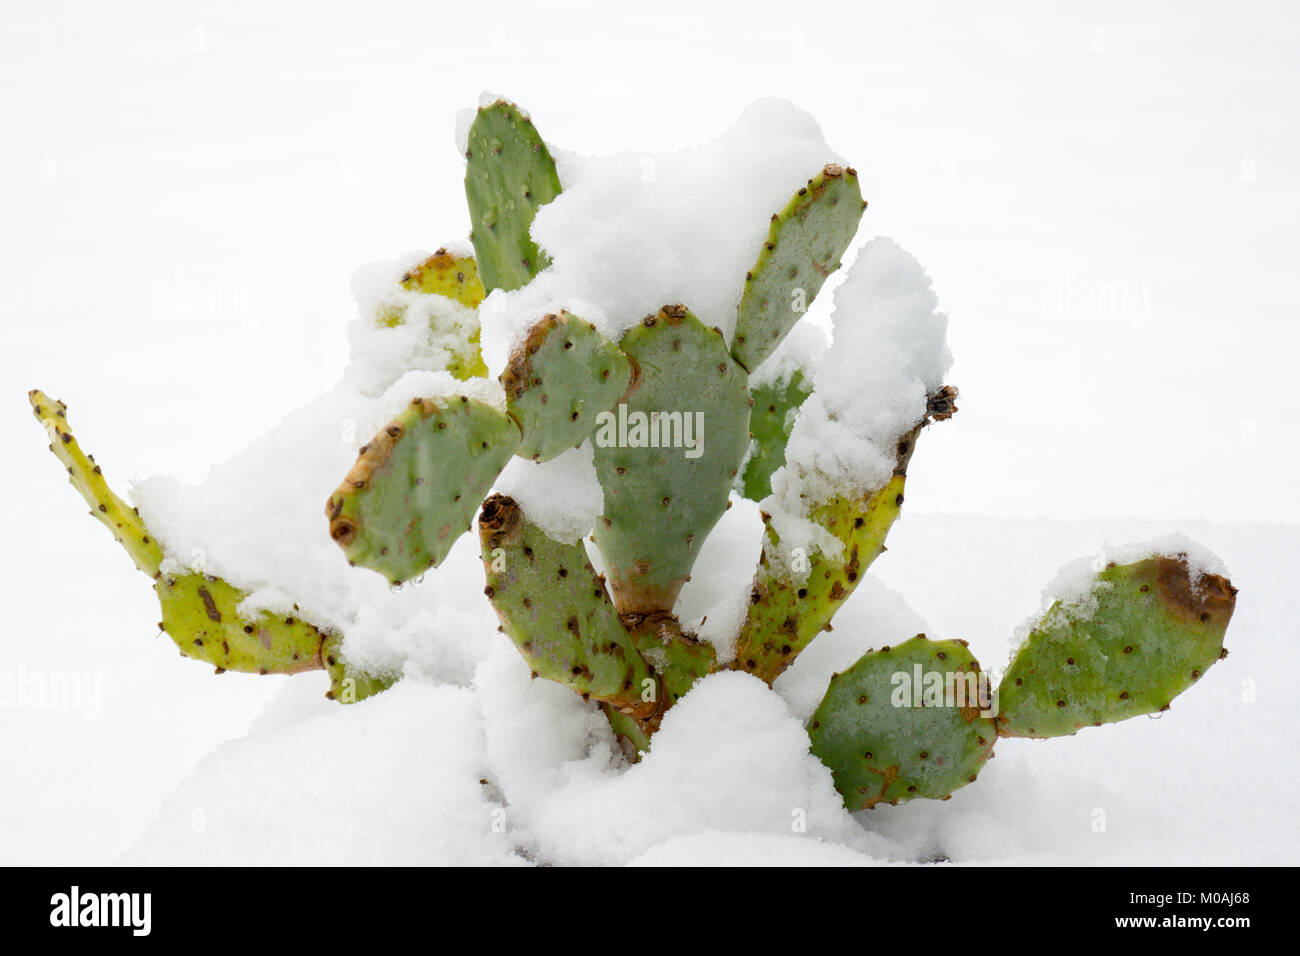 Malvern, Worcestershire, UK, Sunday 10th December 2017.  Overnight snow catches out this semi hardy Cactus that had been enjoying the warm autumn.  It Stock Photo